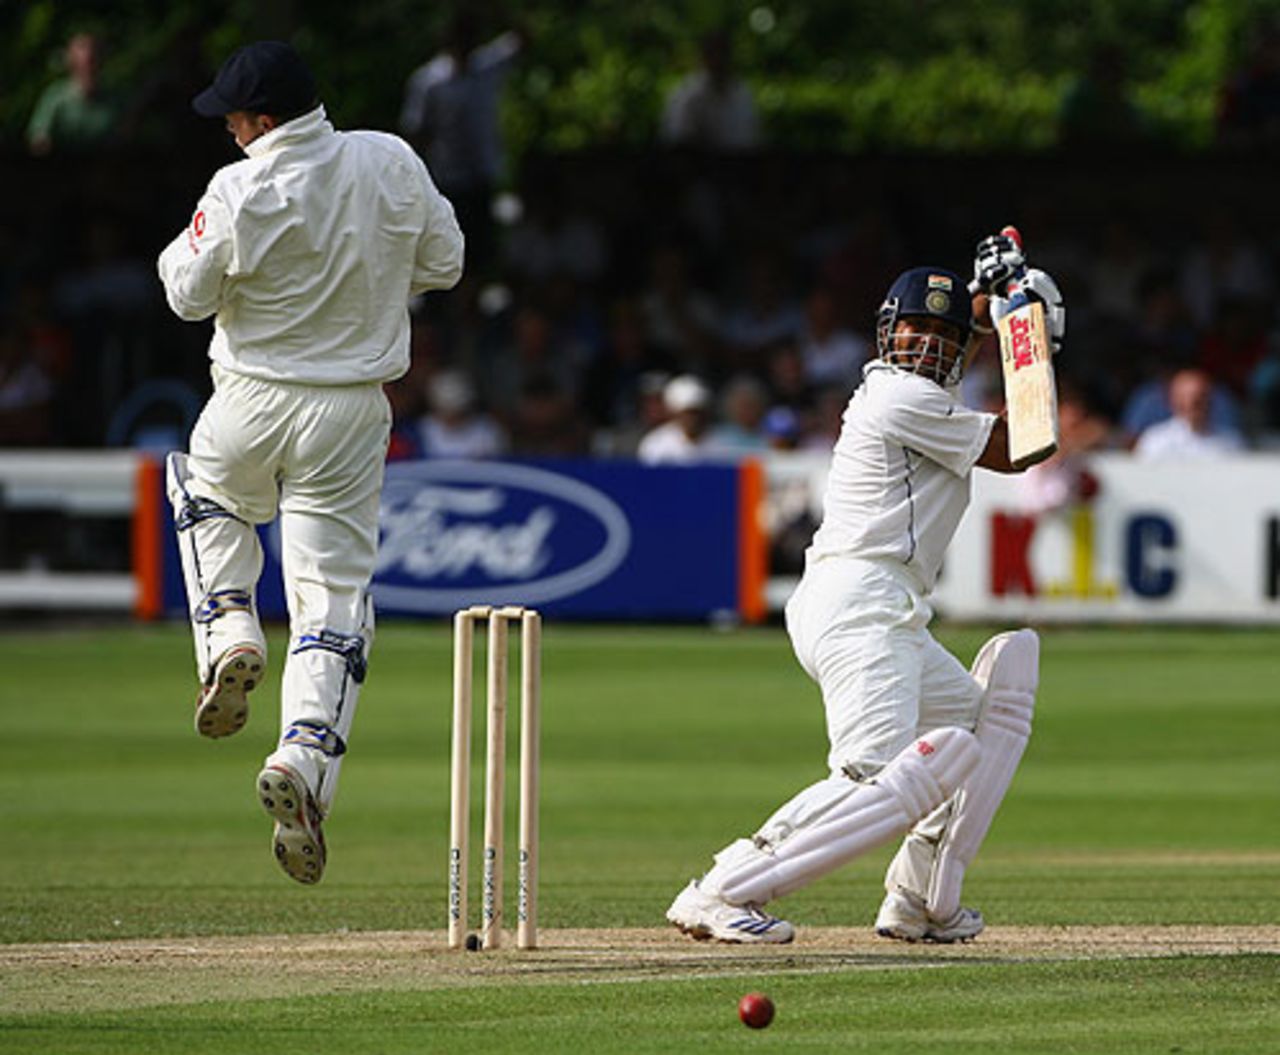 Sachin Tendulkar guides one during his century, England Lions v Indians, Tour match, 2nd day,  Chelmsford, July 14, 2007
